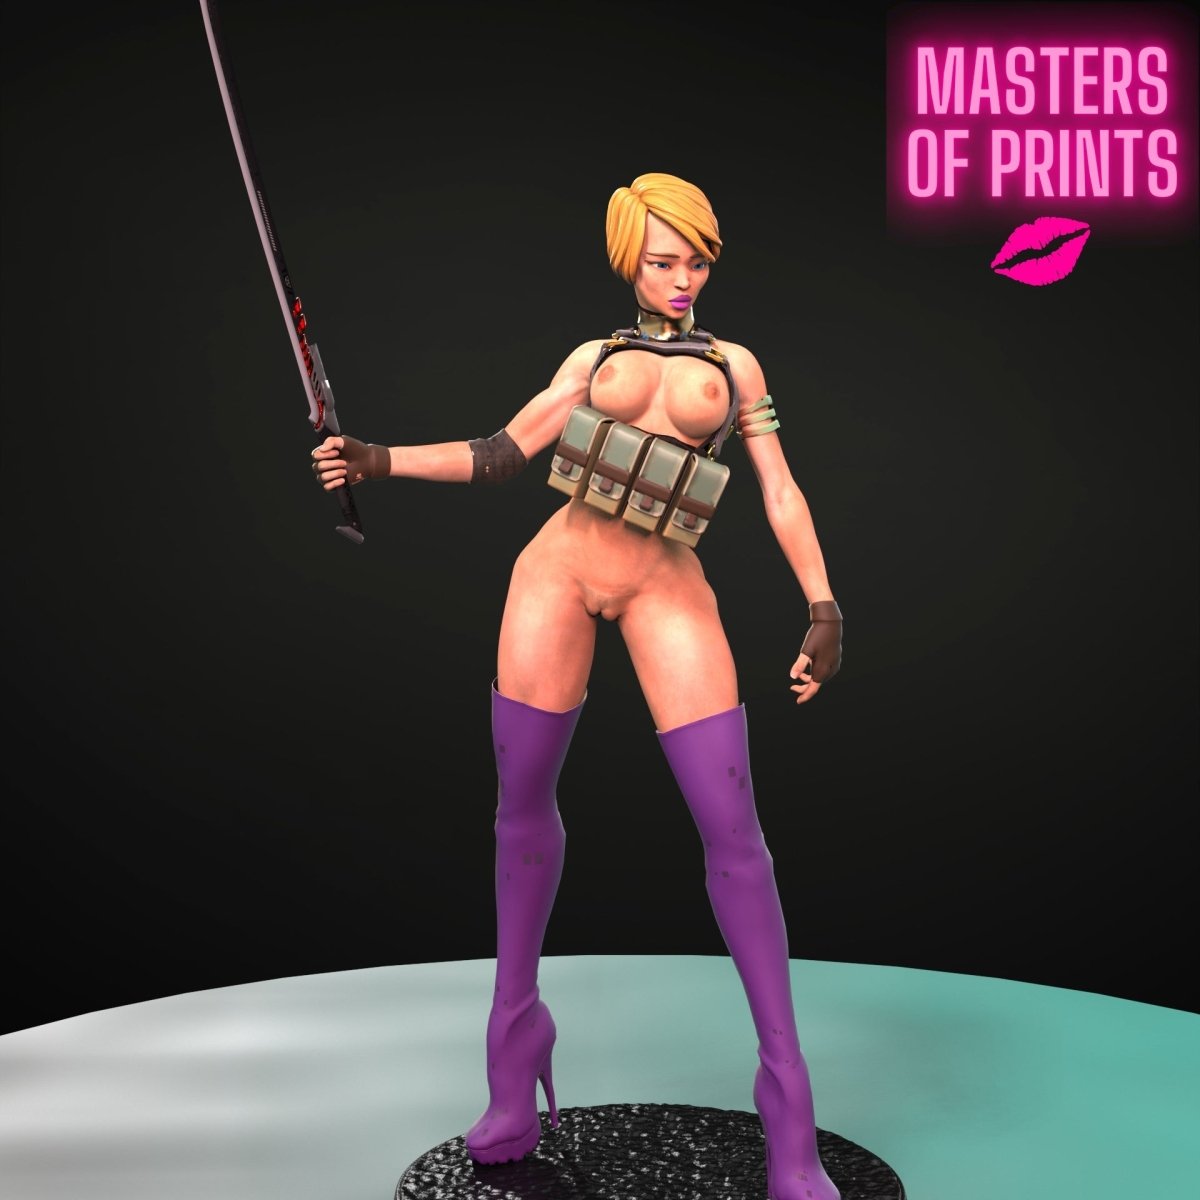 DANGEROUS MOLLY 3 Sexy Naked 3d Printed Miniature FanArt Resin Unpainted Figure